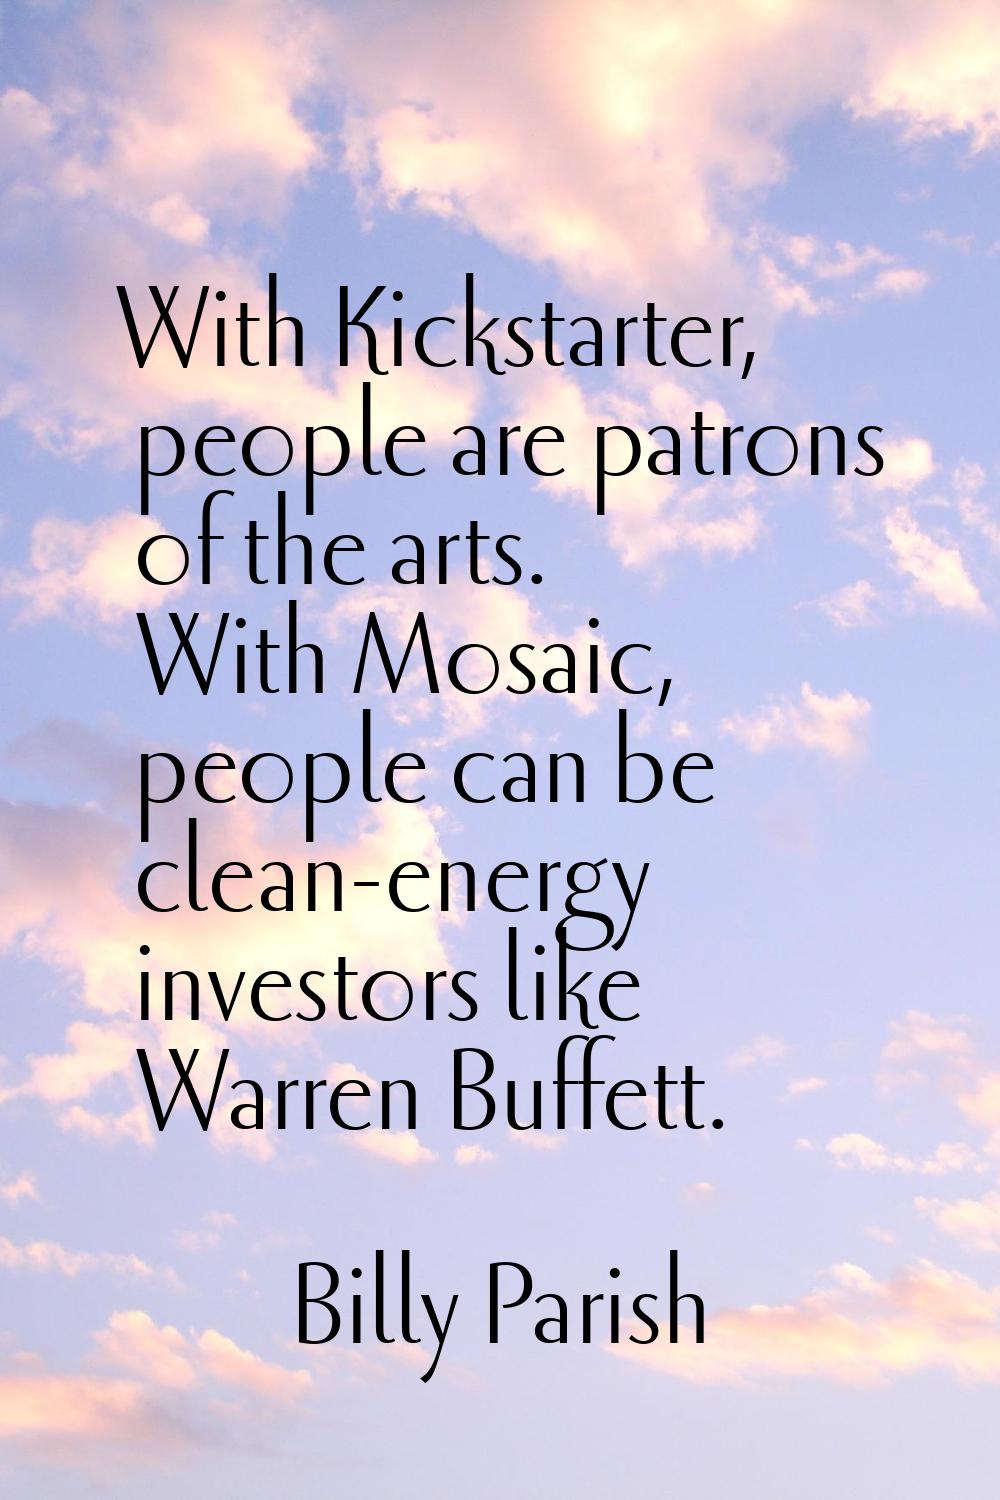 With Kickstarter, people are patrons of the arts. With Mosaic, people can be clean-energy investors